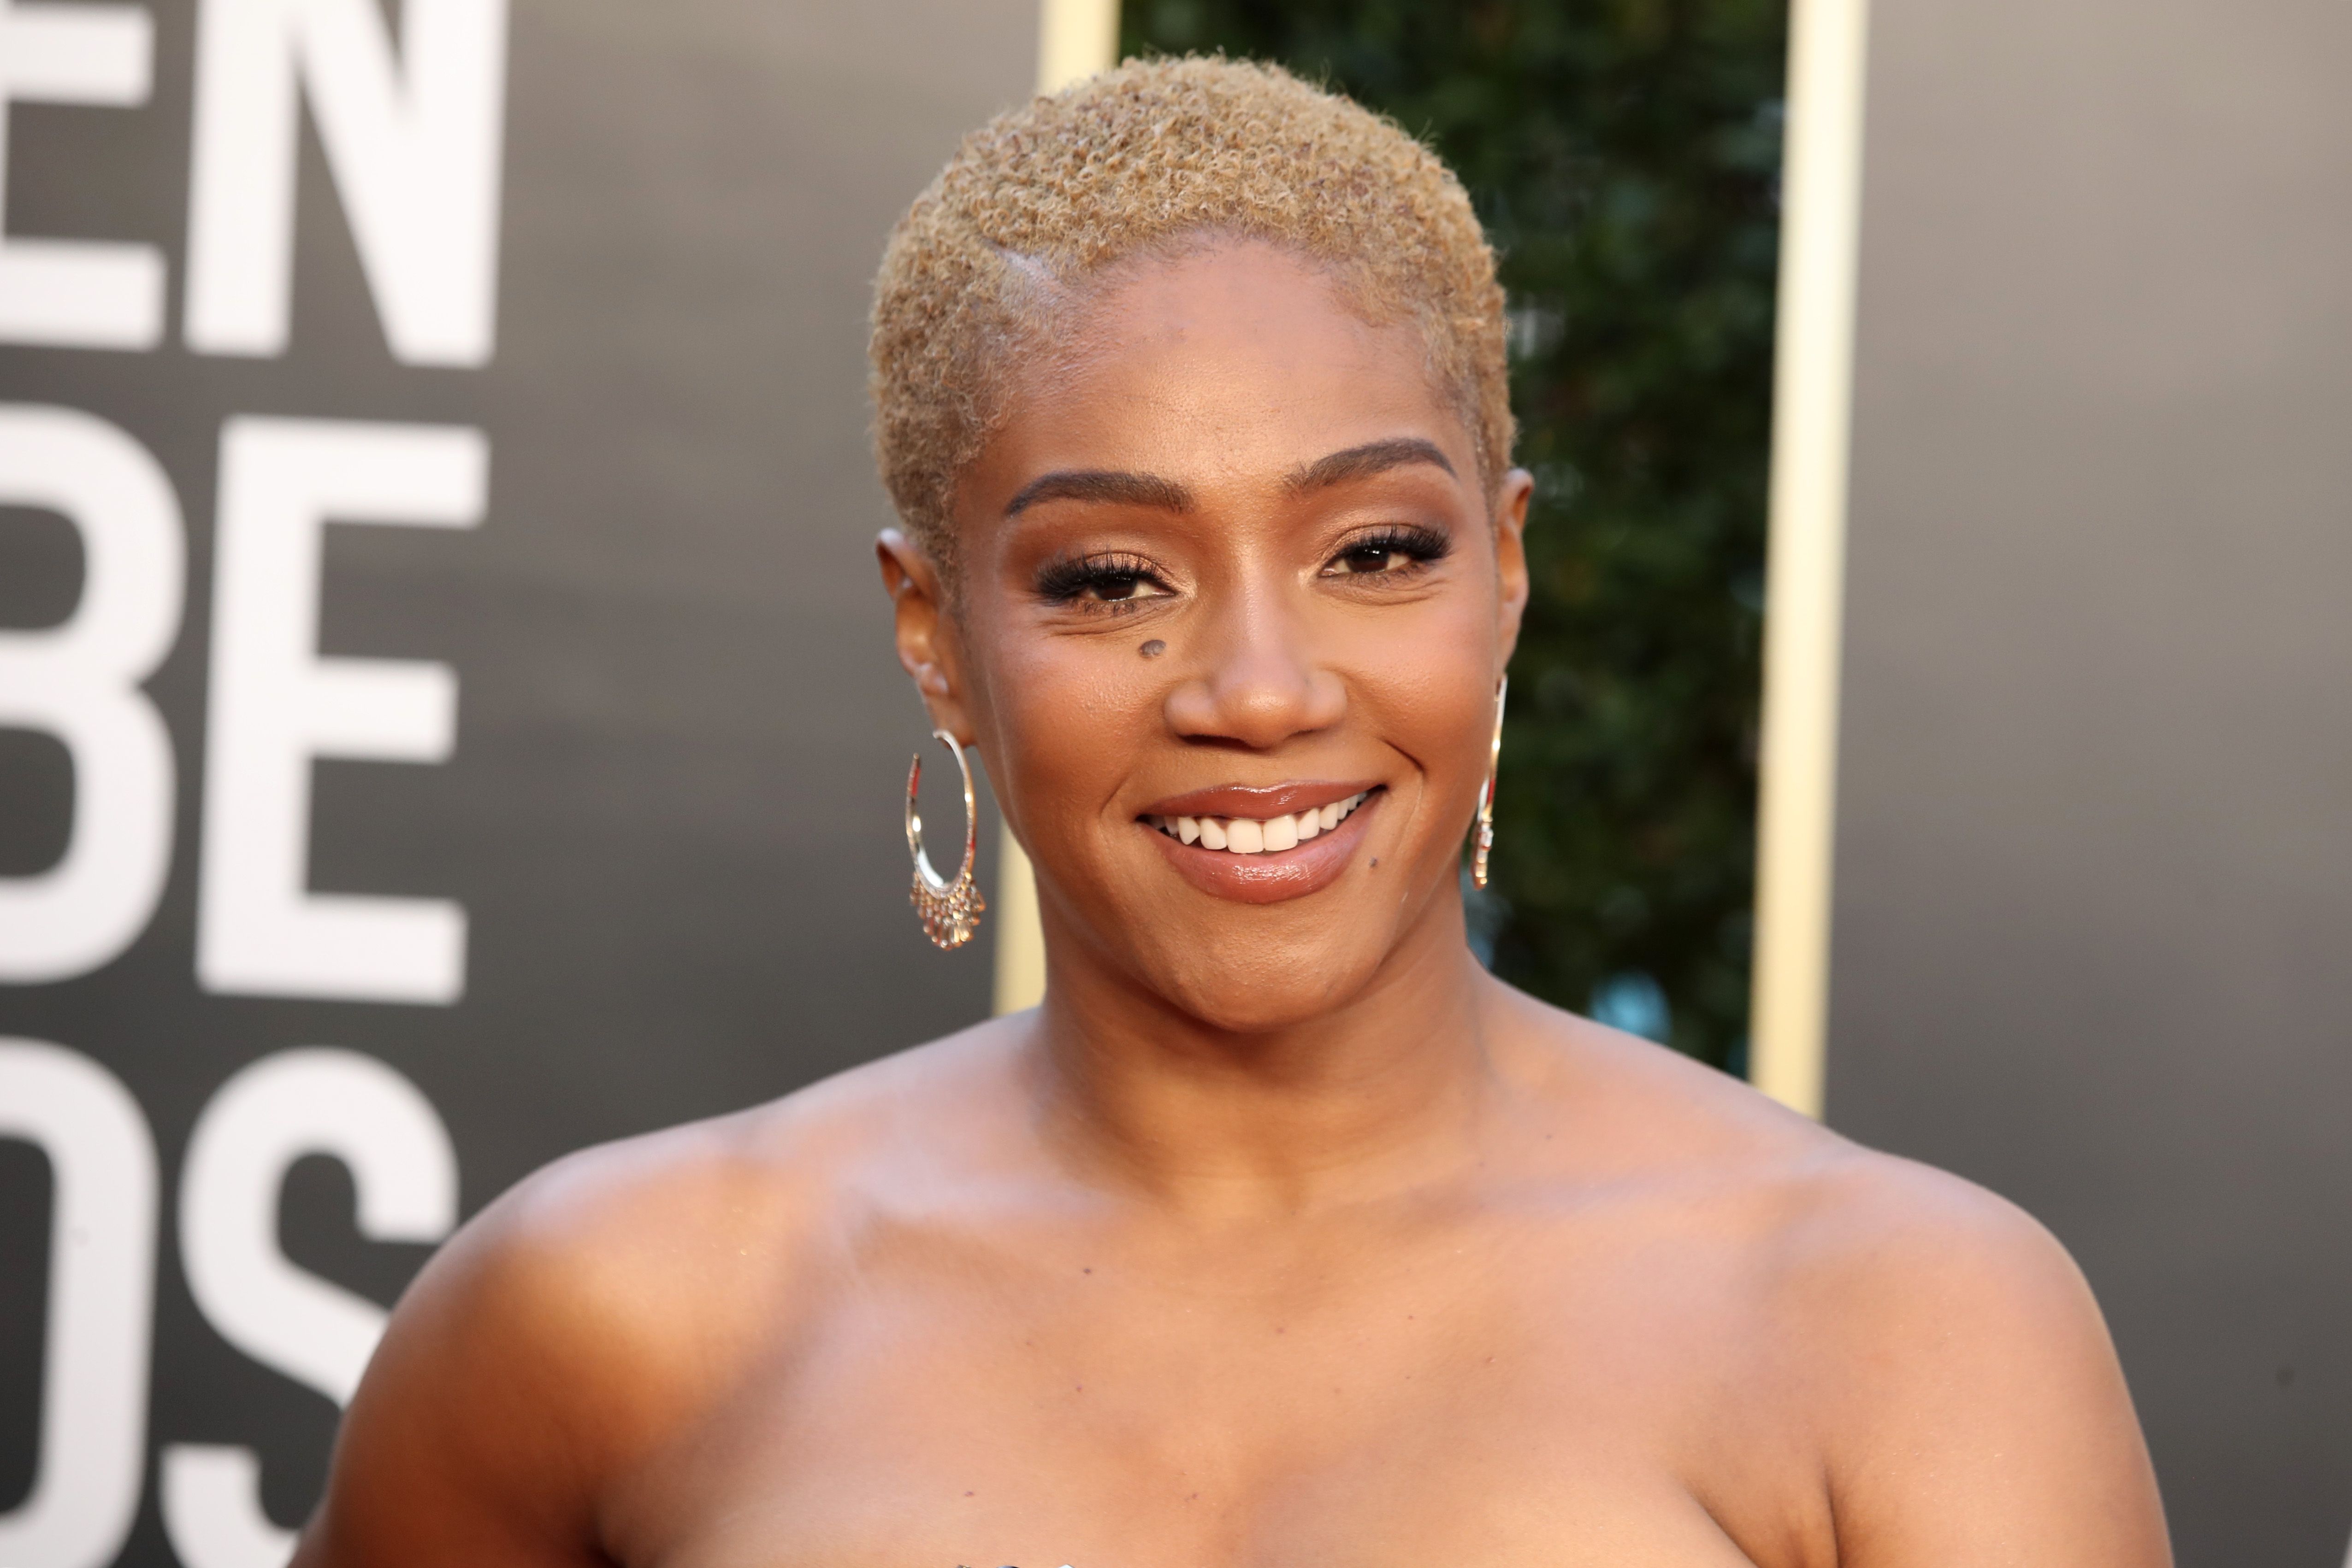 Nude pictures of tiffany haddish